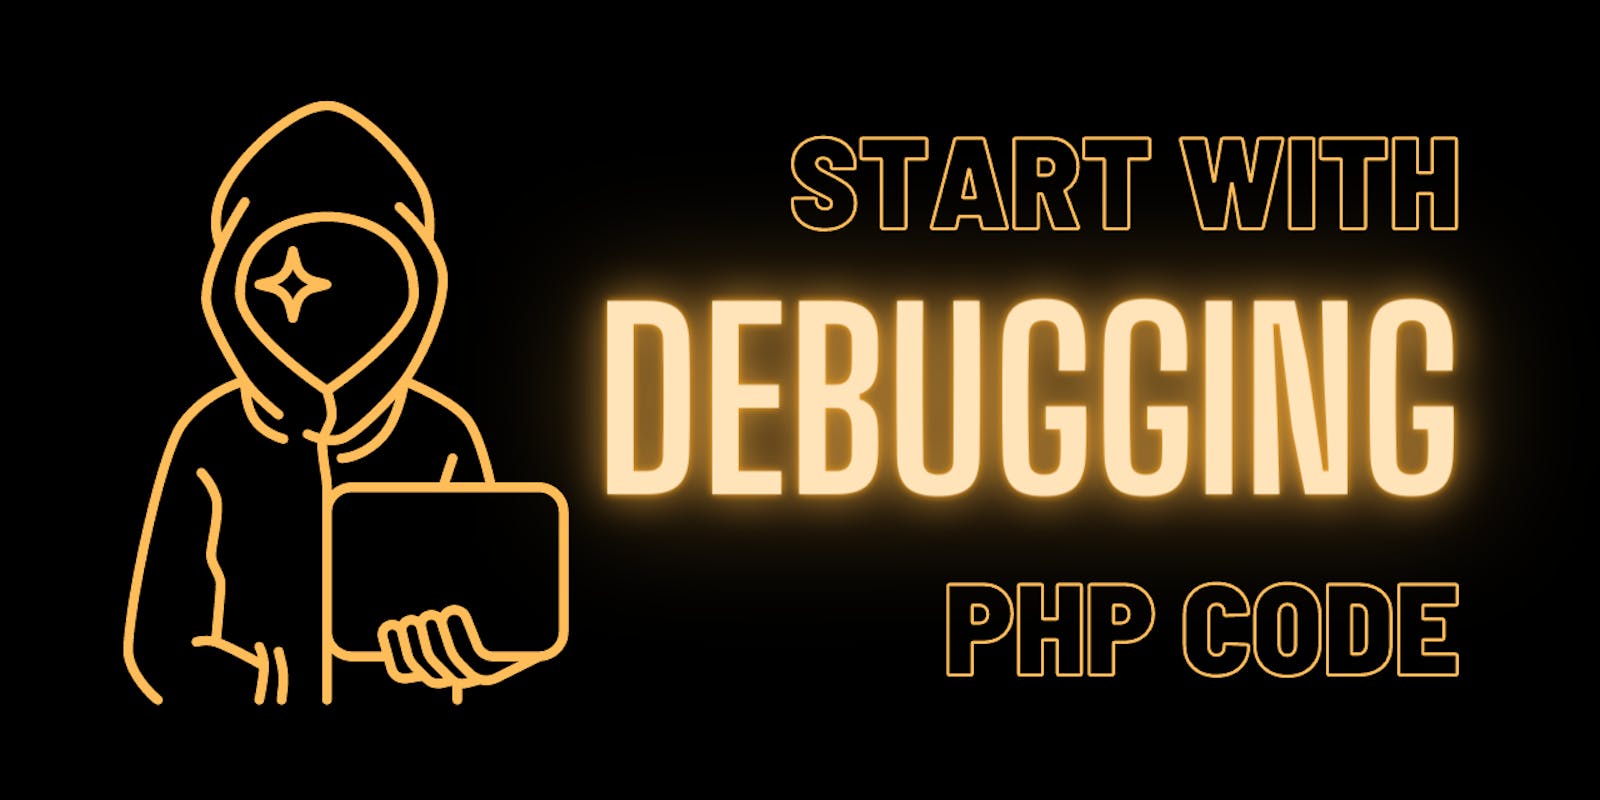 Start with debugging PHP code